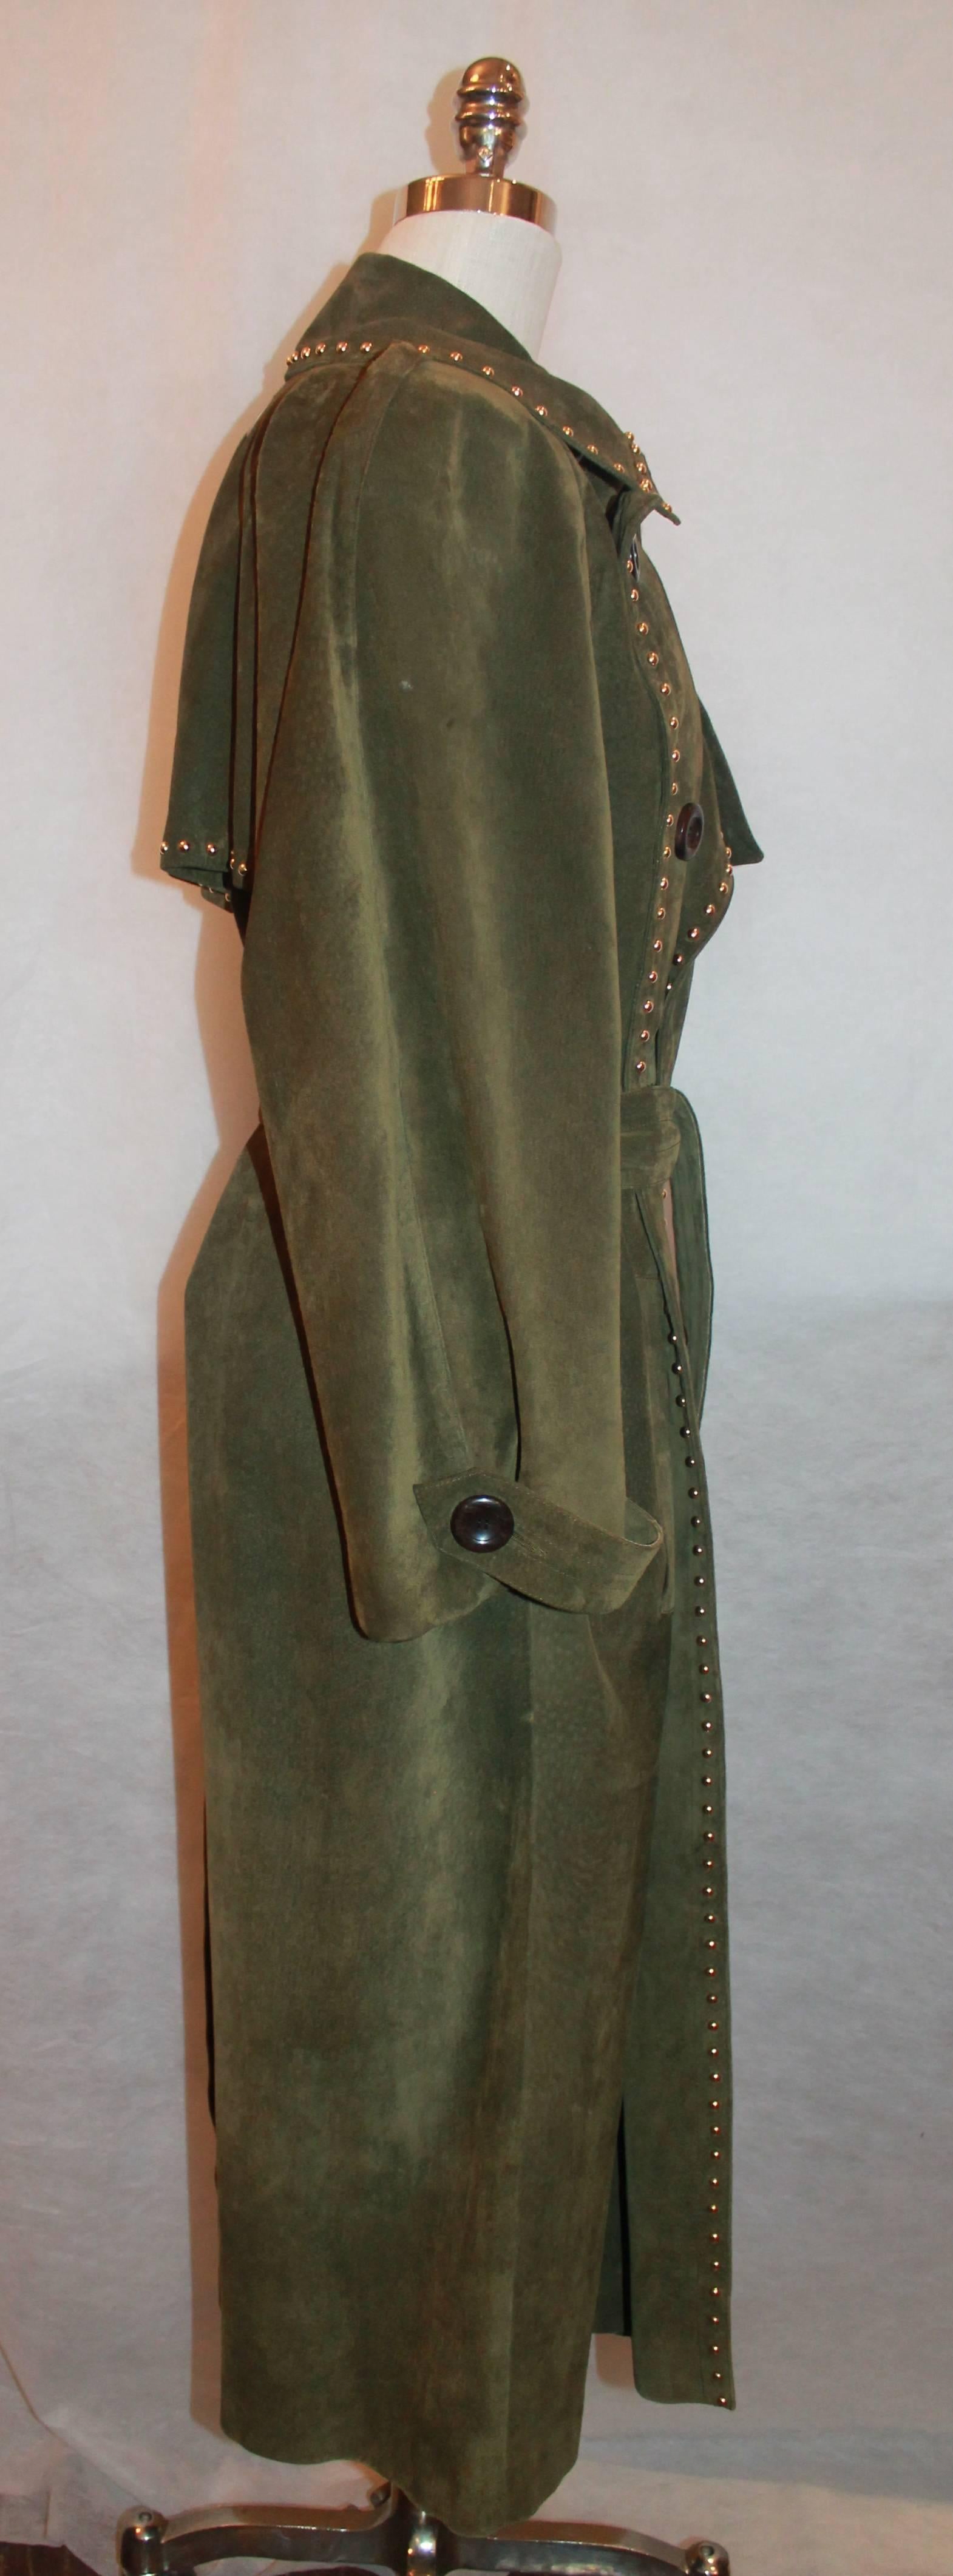 1990's Yves Saint Laurent Olive Suede Full Length Trench Coat with Belt - 38 This coat is vintage and is in excellent condition. It has 2 front pockets and satin  gold studded trim.

Measurements:
Bust: Up to 45